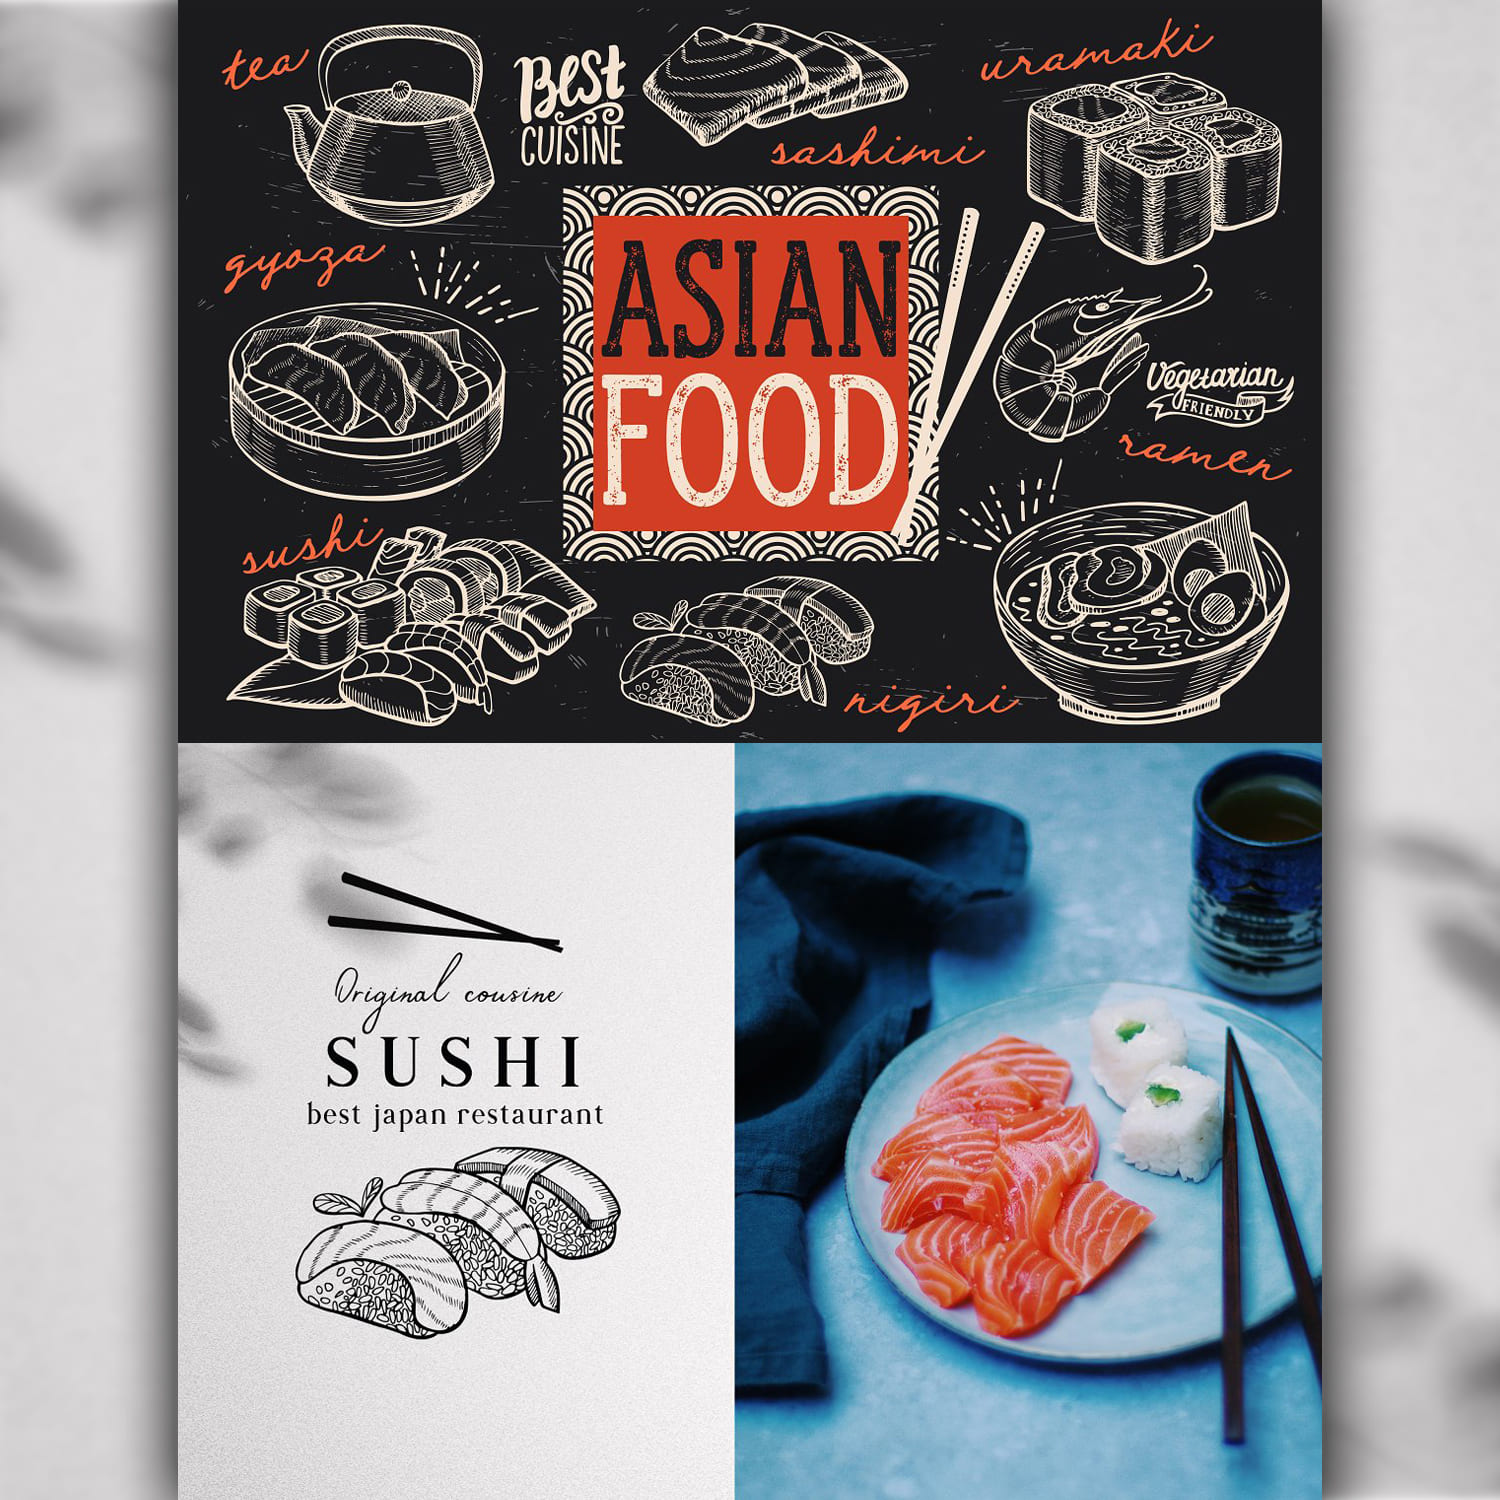 Asian Food Illustrations, Sushi cover image.